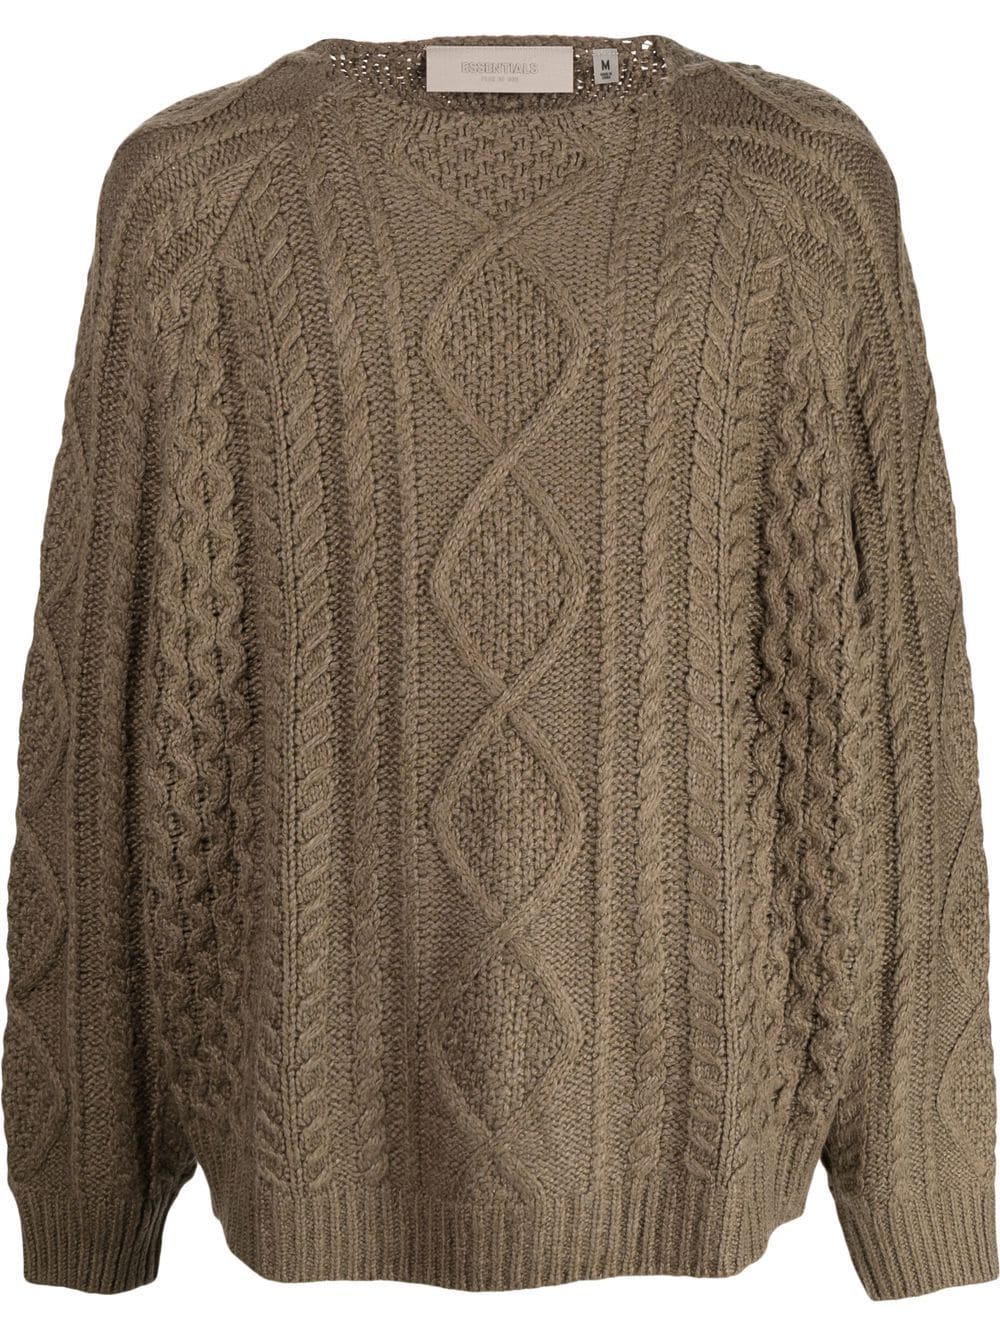 FEAR OF GOD ESSENTIALS crew-neck cable-knit jumper - Green von FEAR OF GOD ESSENTIALS